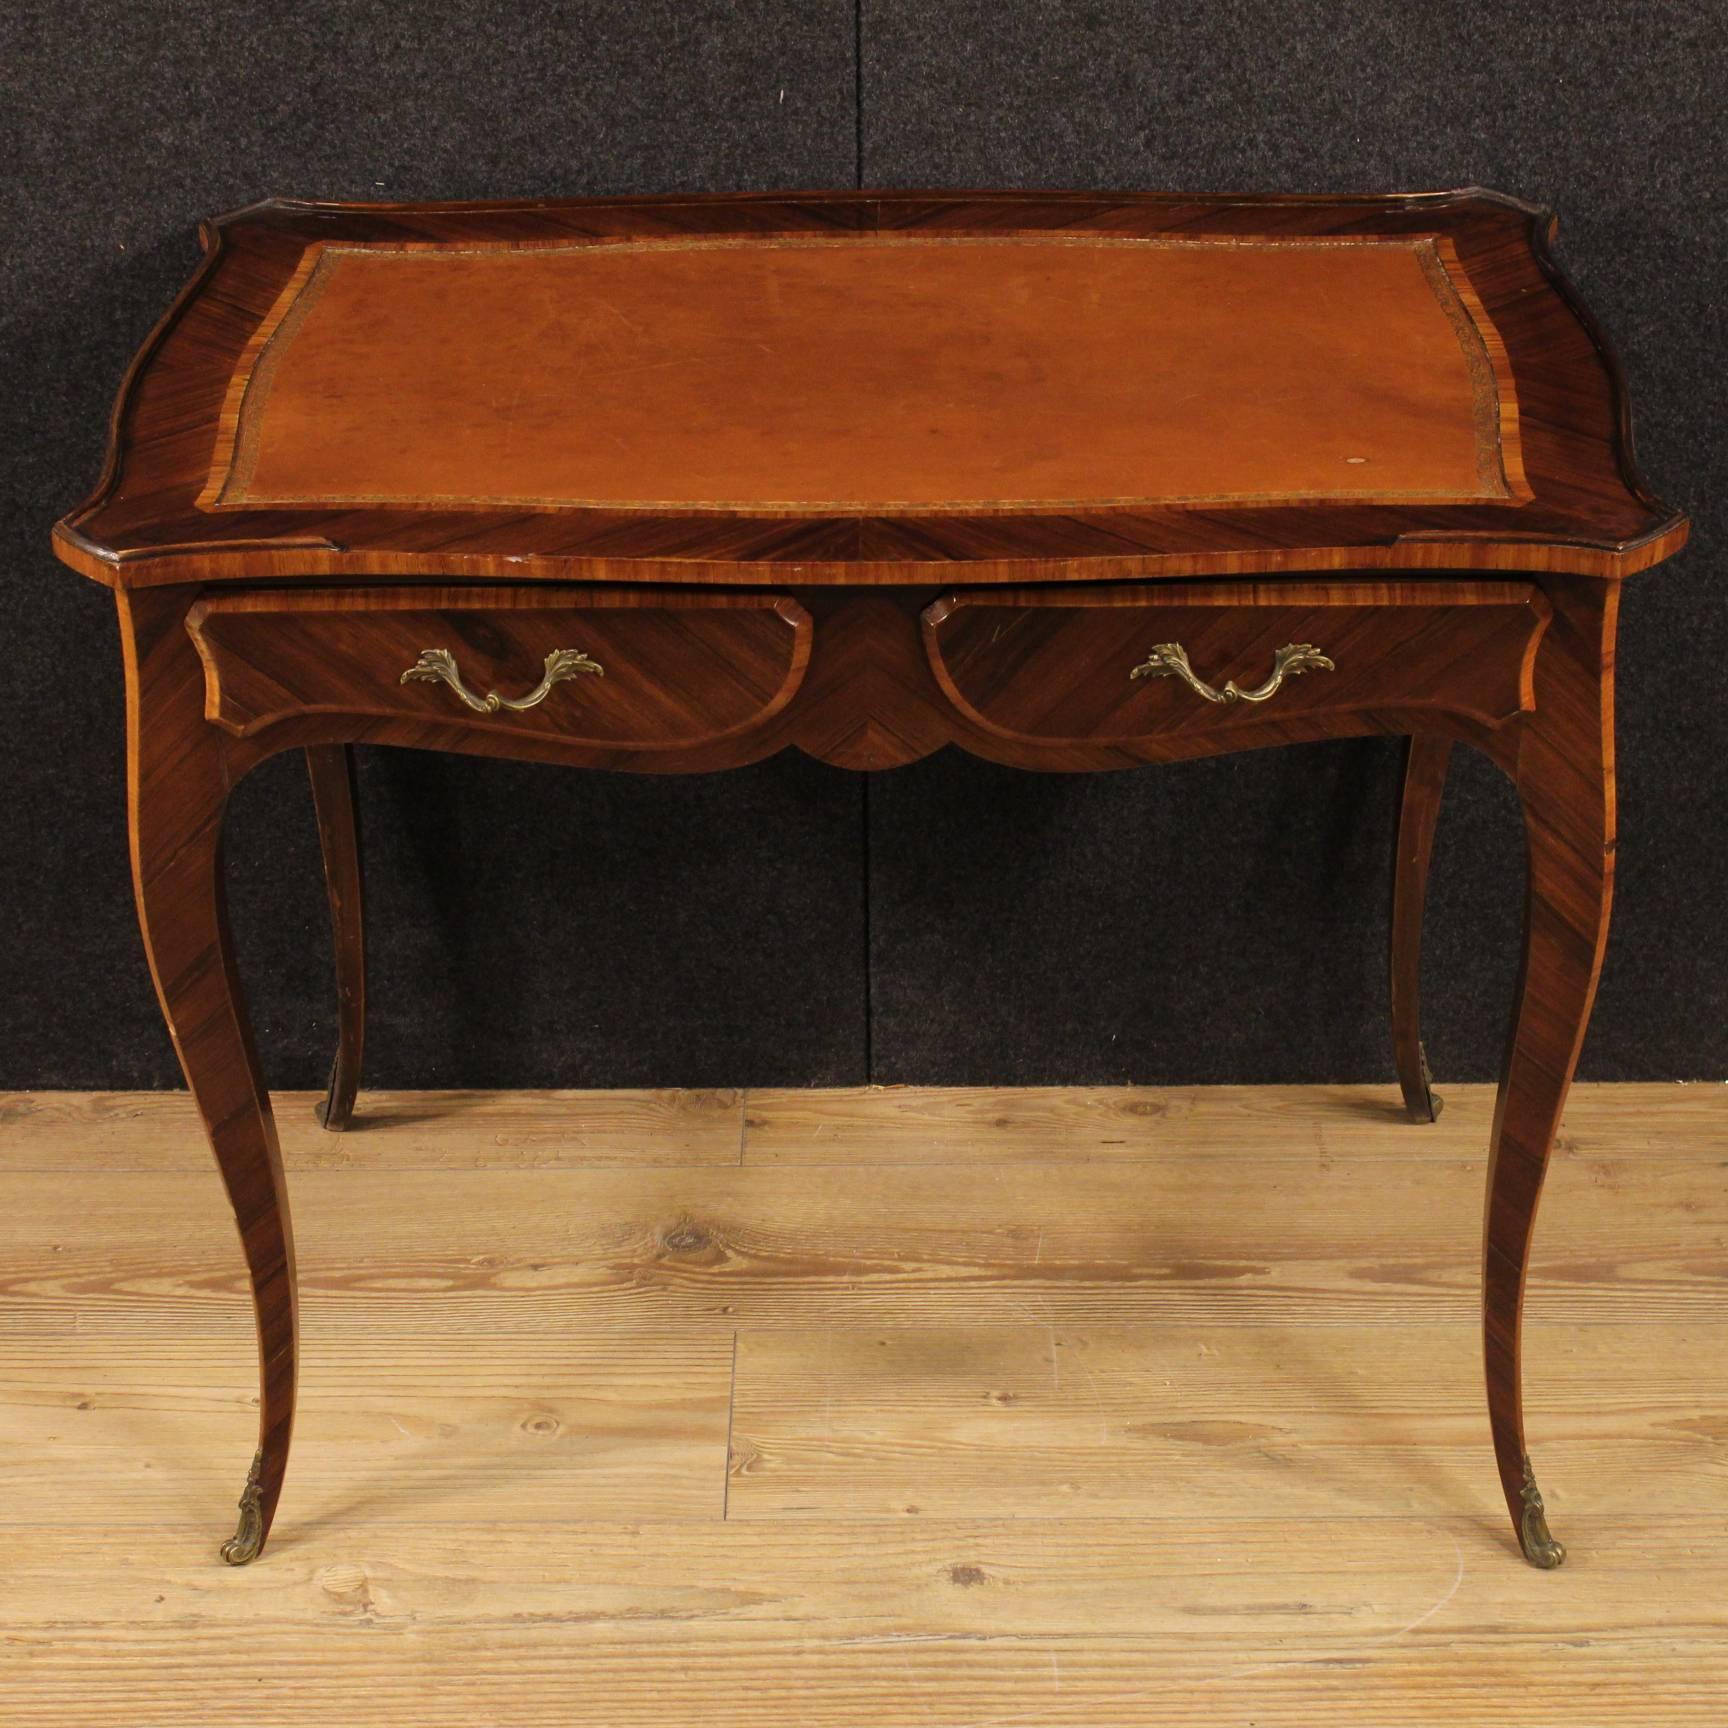 Elegant Genoese little writing table of the 20th century. High-quality furniture in rosewood and palisander in Louis XV style. Furniture of little extent and excellent proportions with writing top of good fit and service. Coffee table finished for